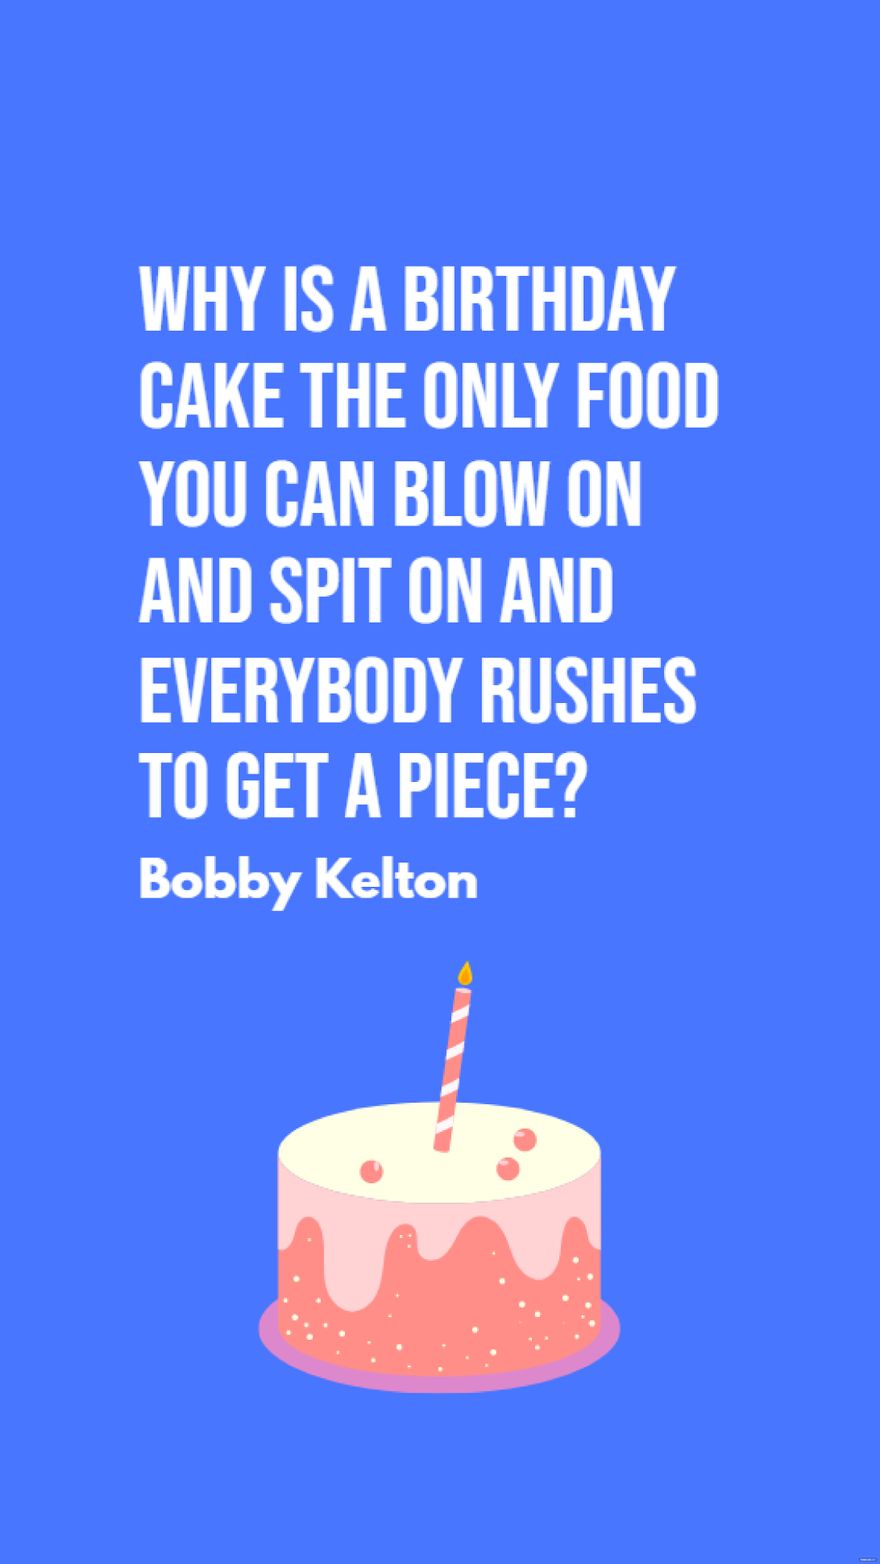 Bobby Kelton - Why is a birthday cake the only food you can blow on and spit on and everybody rushes to get a piece?